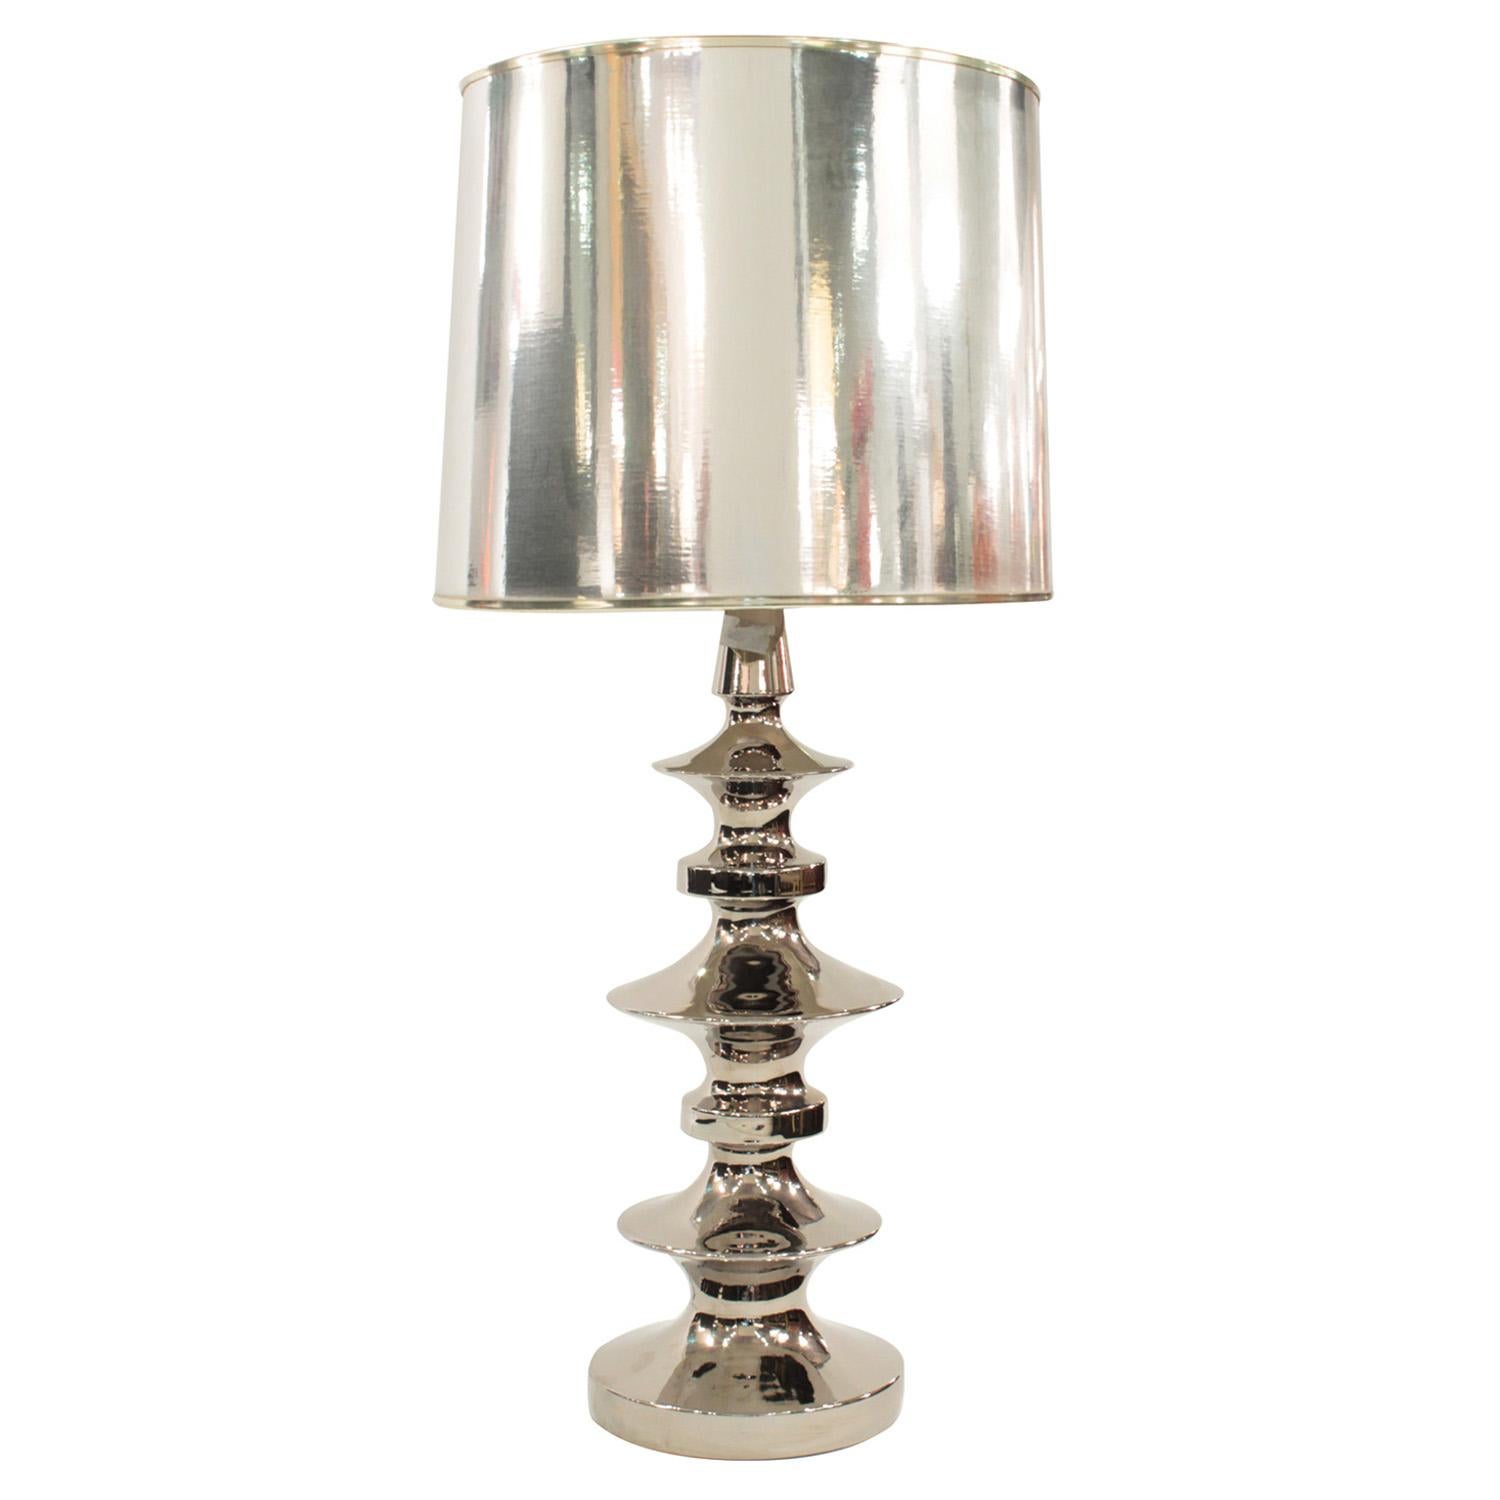 Large sculptural table lamp in nickel with reflective silver shade, American, 1970s.  This lamp is super stylish and would make add a wow factor to any room.